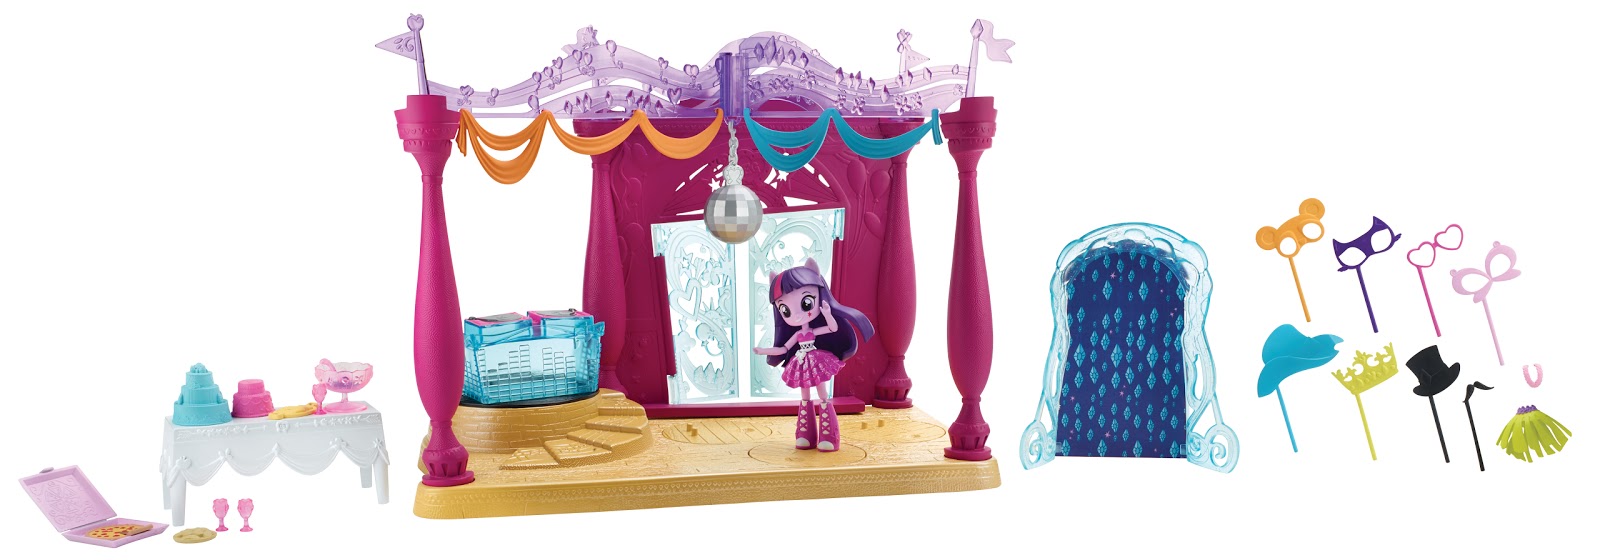 [Topic General] Poupées Equestria Girl - Page 16 MY%2BLITTLE%2BPONY%2BEQUESTRIA%2BGIRLS%2BMINIS%2BDance%2BPlayset